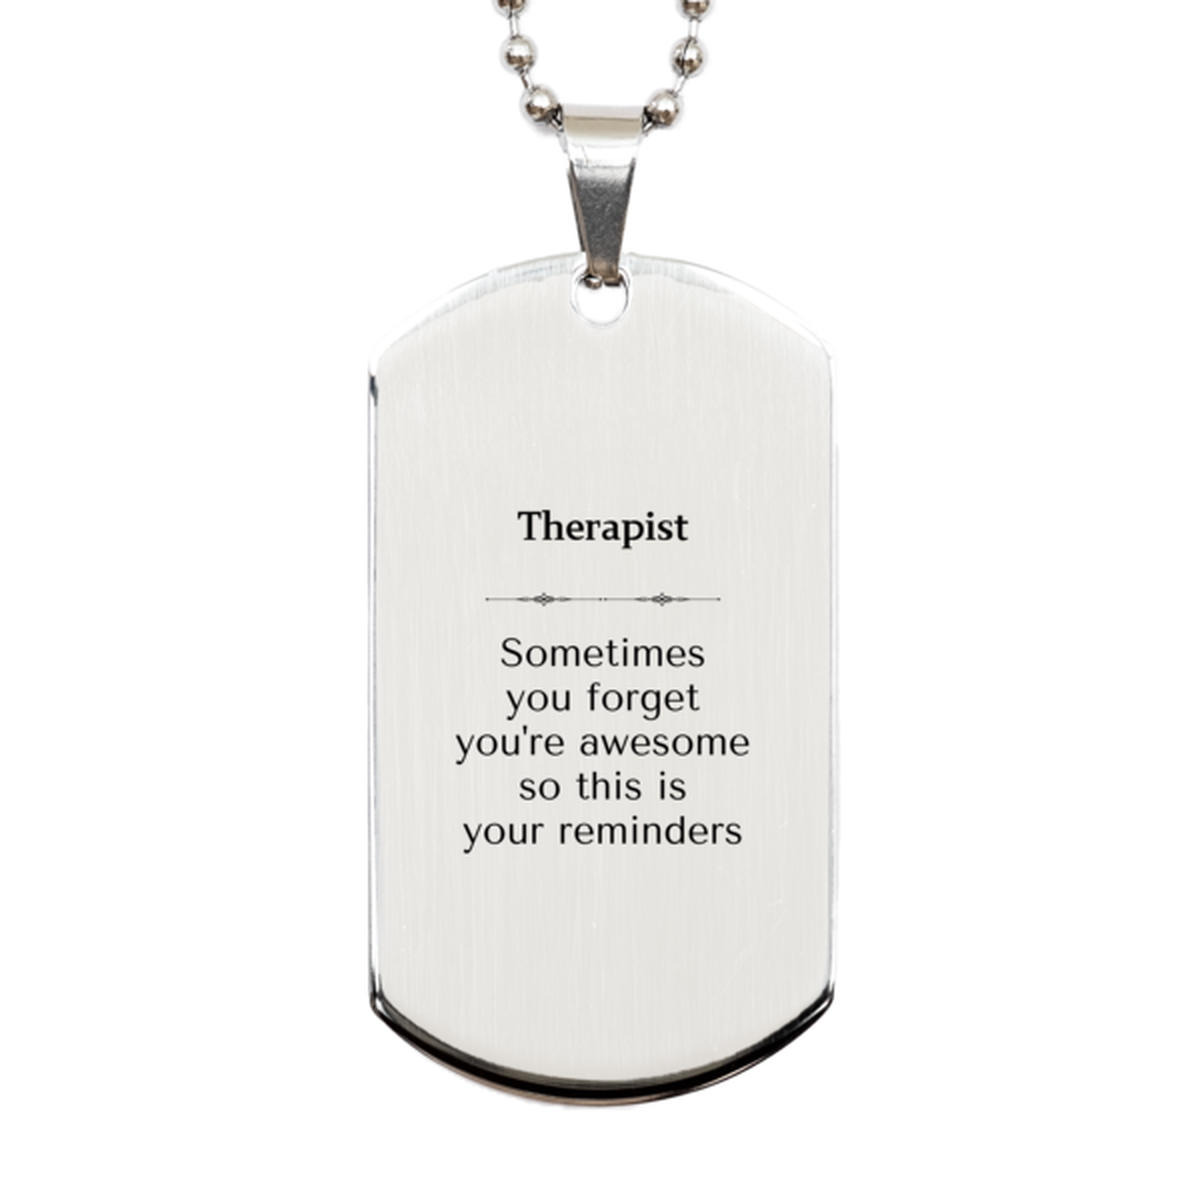 Sentimental Therapist Silver Dog Tag, Therapist Sometimes you forget you're awesome so this is your reminders, Graduation Christmas Birthday Gifts for Therapist, Men, Women, Coworkers